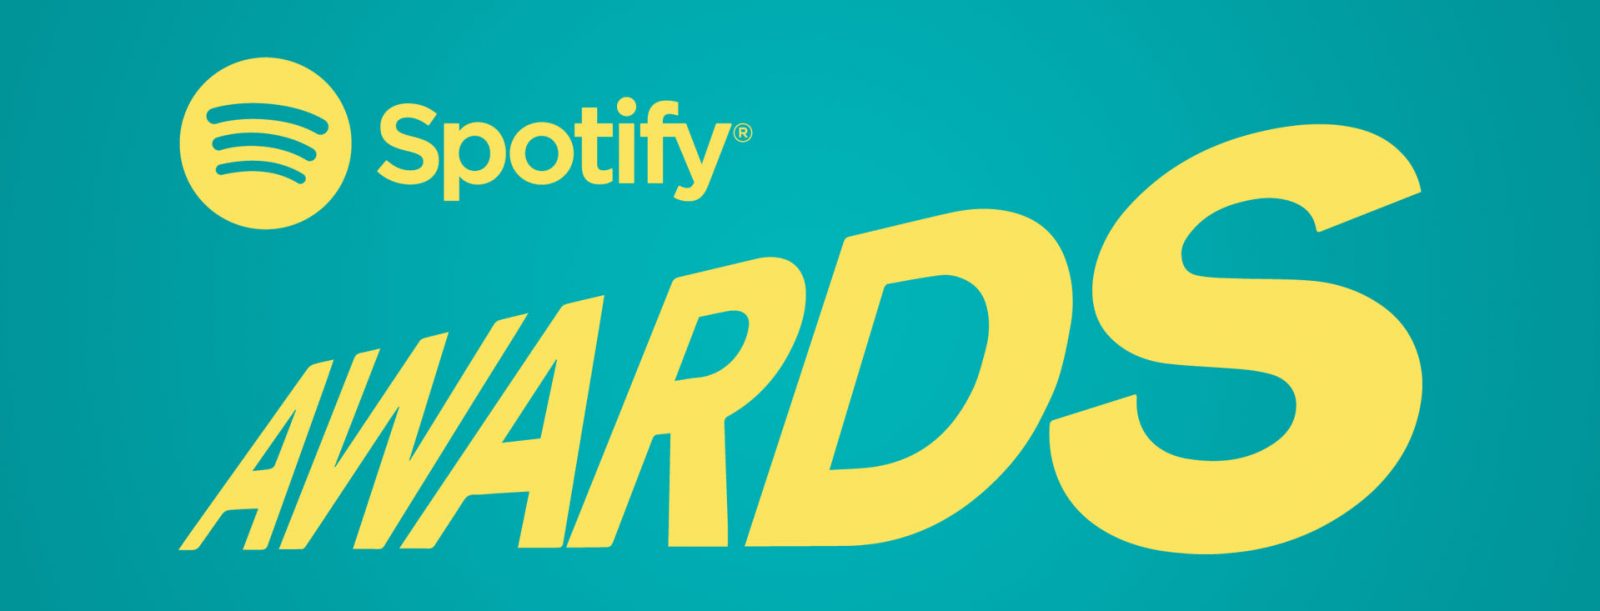 Spotify announce the Finalists for the first ever Spotify Awards show